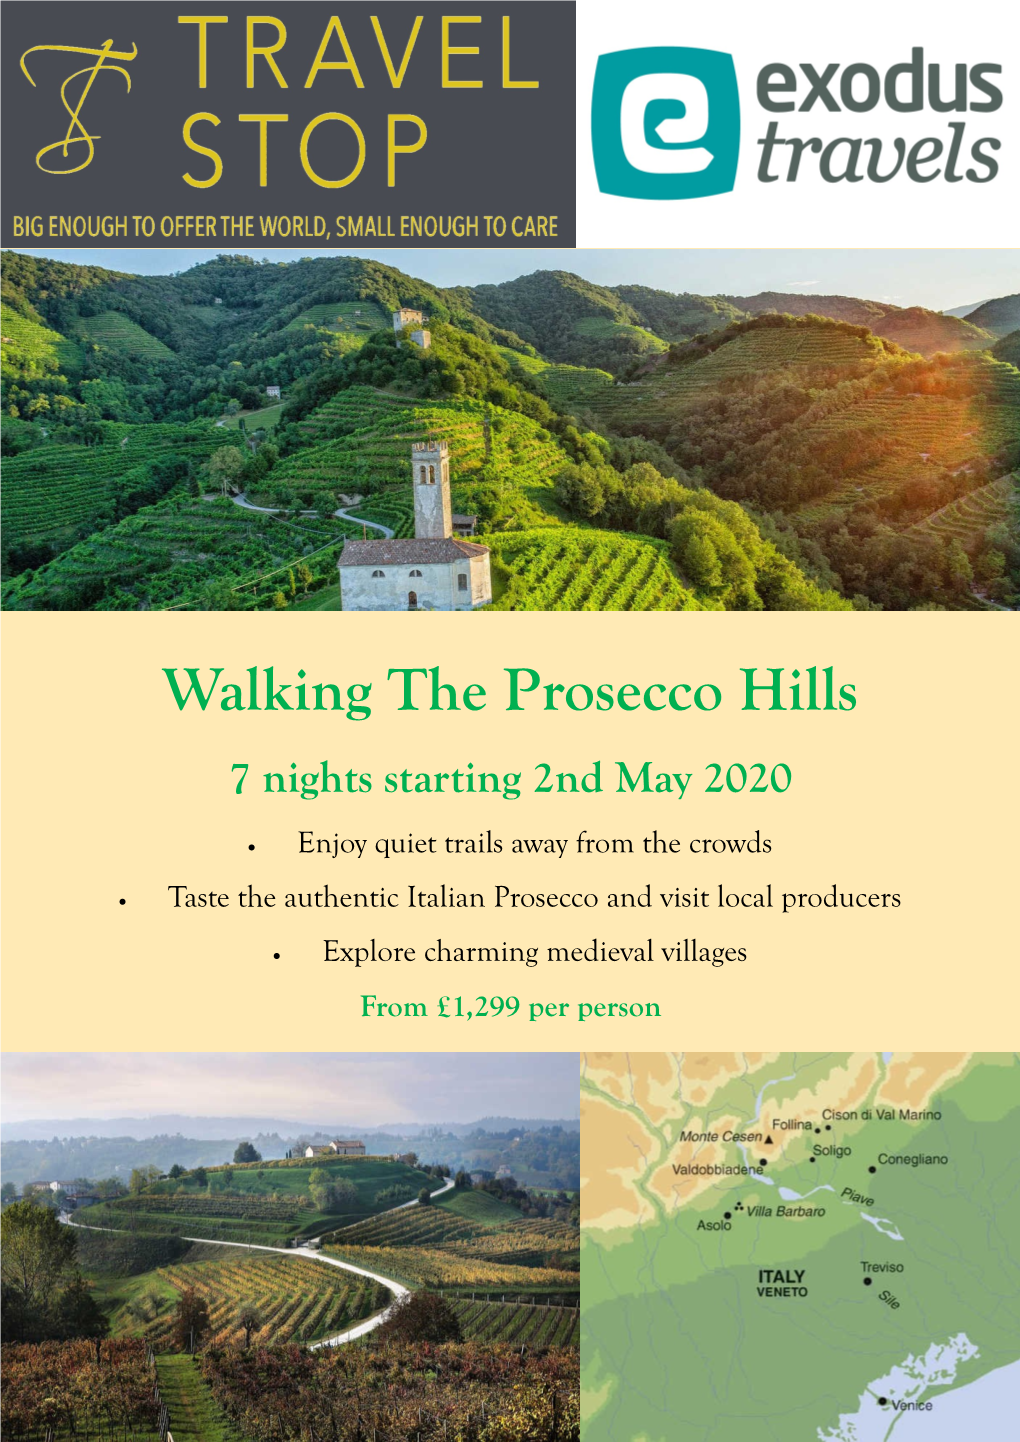 Walking the Prosecco Hills Itinerary